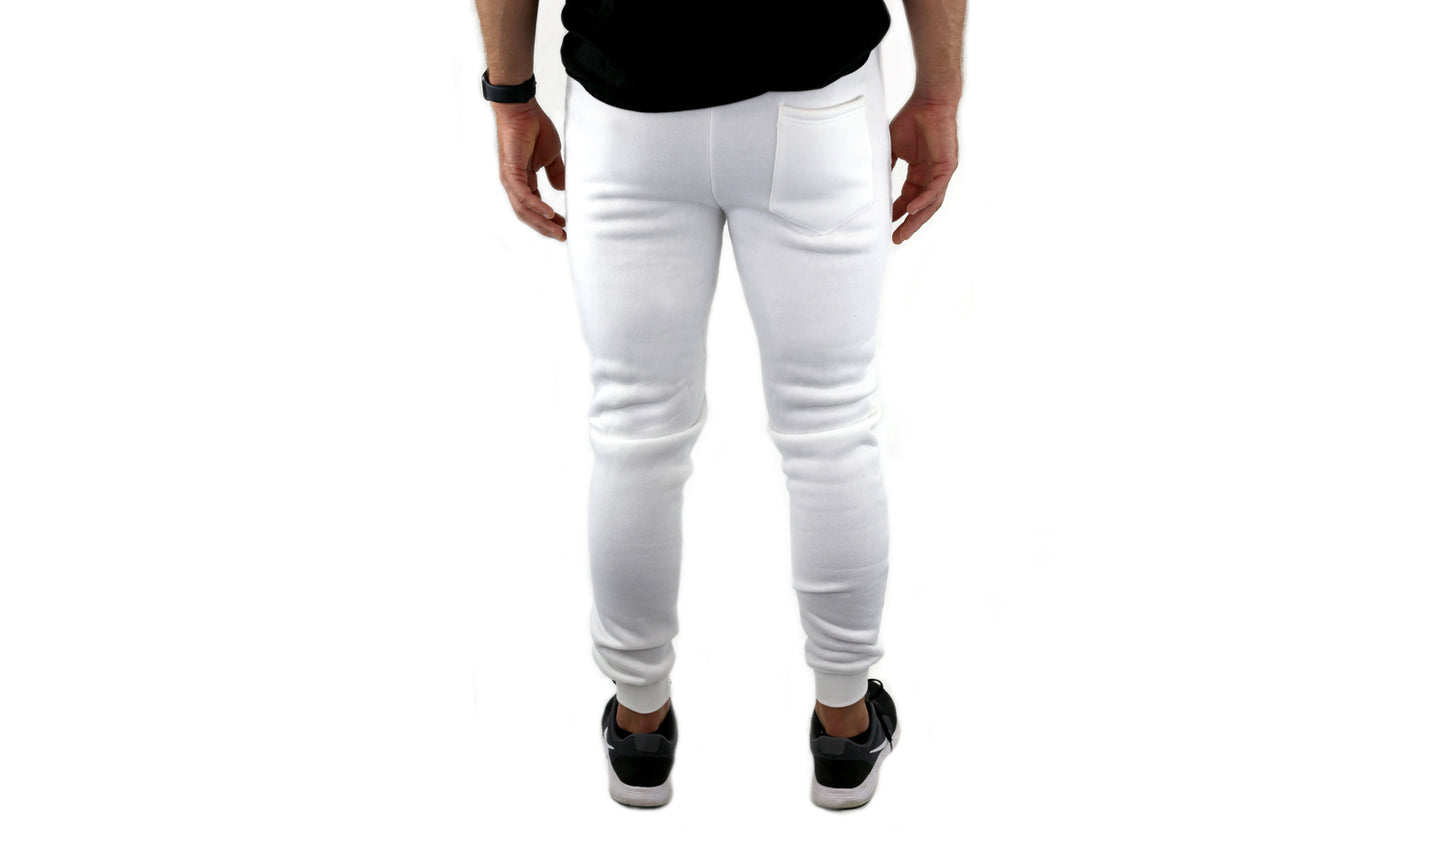 Mens Skinny Track Pants Joggers Trousers Gym Casual Sweat Cuffed Slim Trackies Fleece - White - XL